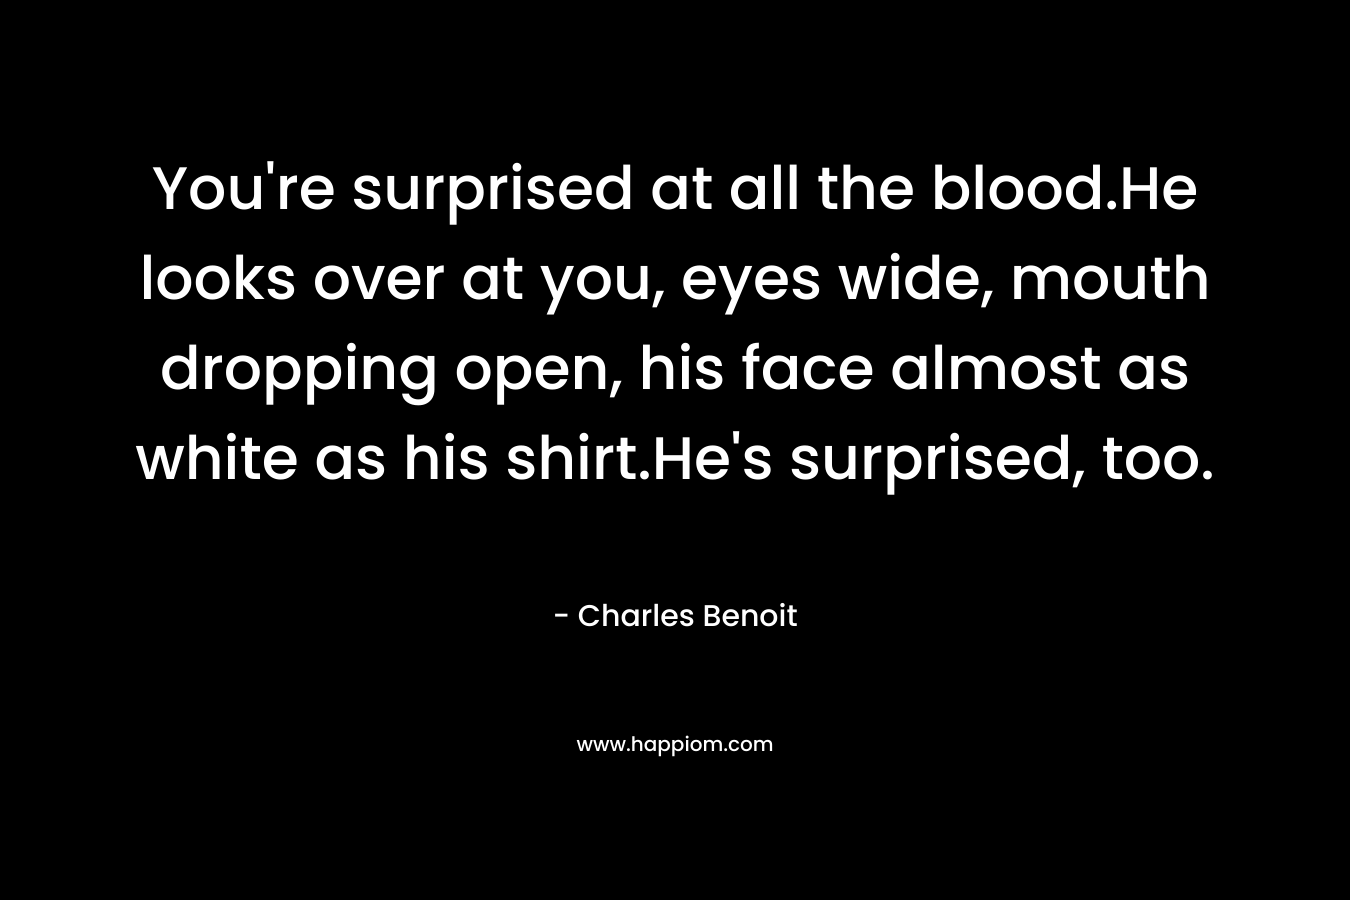 You’re surprised at all the blood.He looks over at you, eyes wide, mouth dropping open, his face almost as white as his shirt.He’s surprised, too. – Charles Benoit